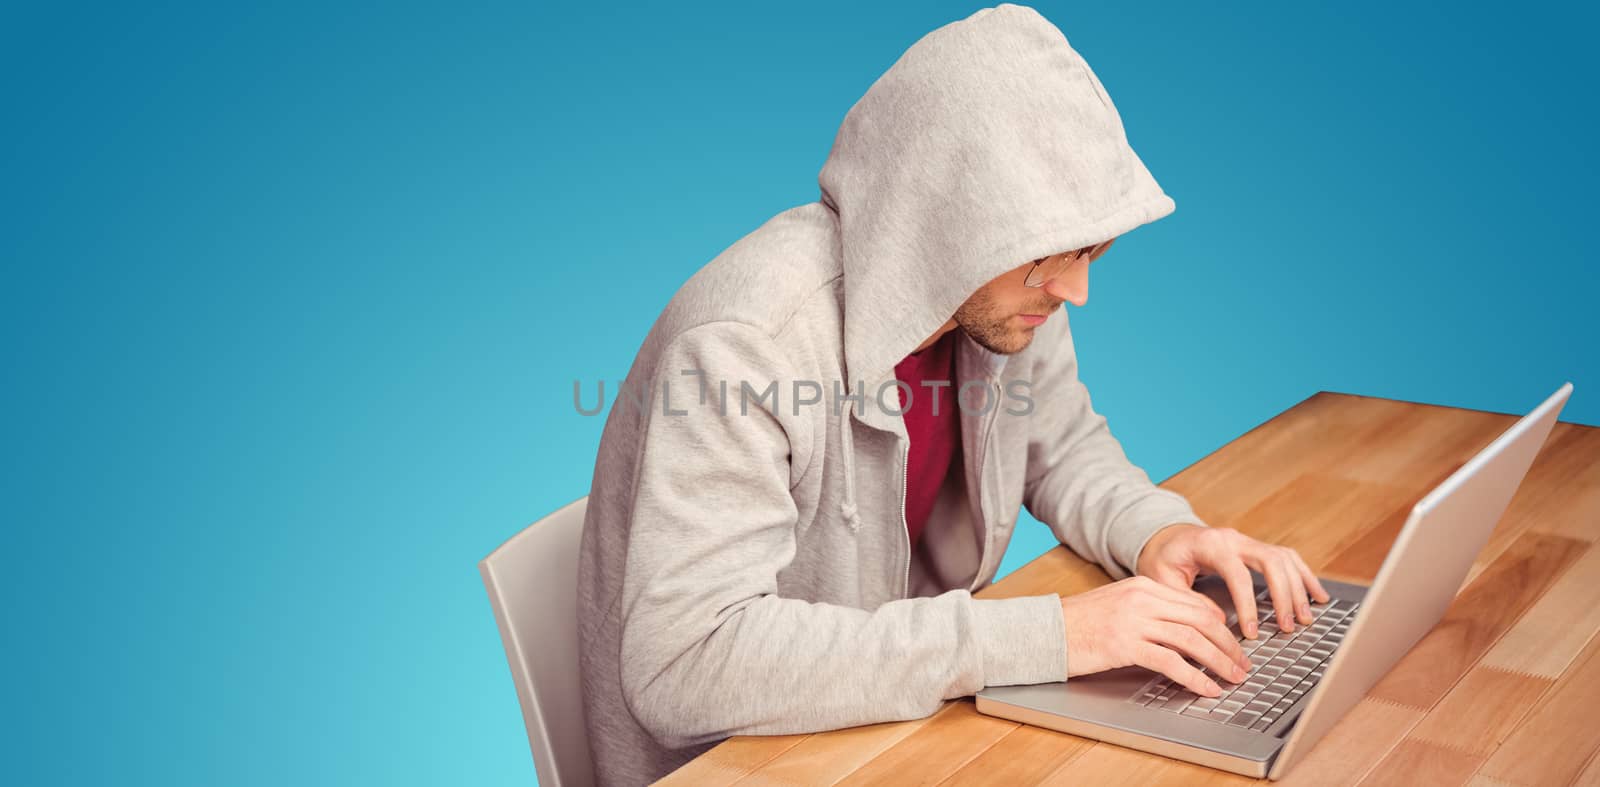 Composite image of businessman with hooded shirt working on laptop by Wavebreakmedia